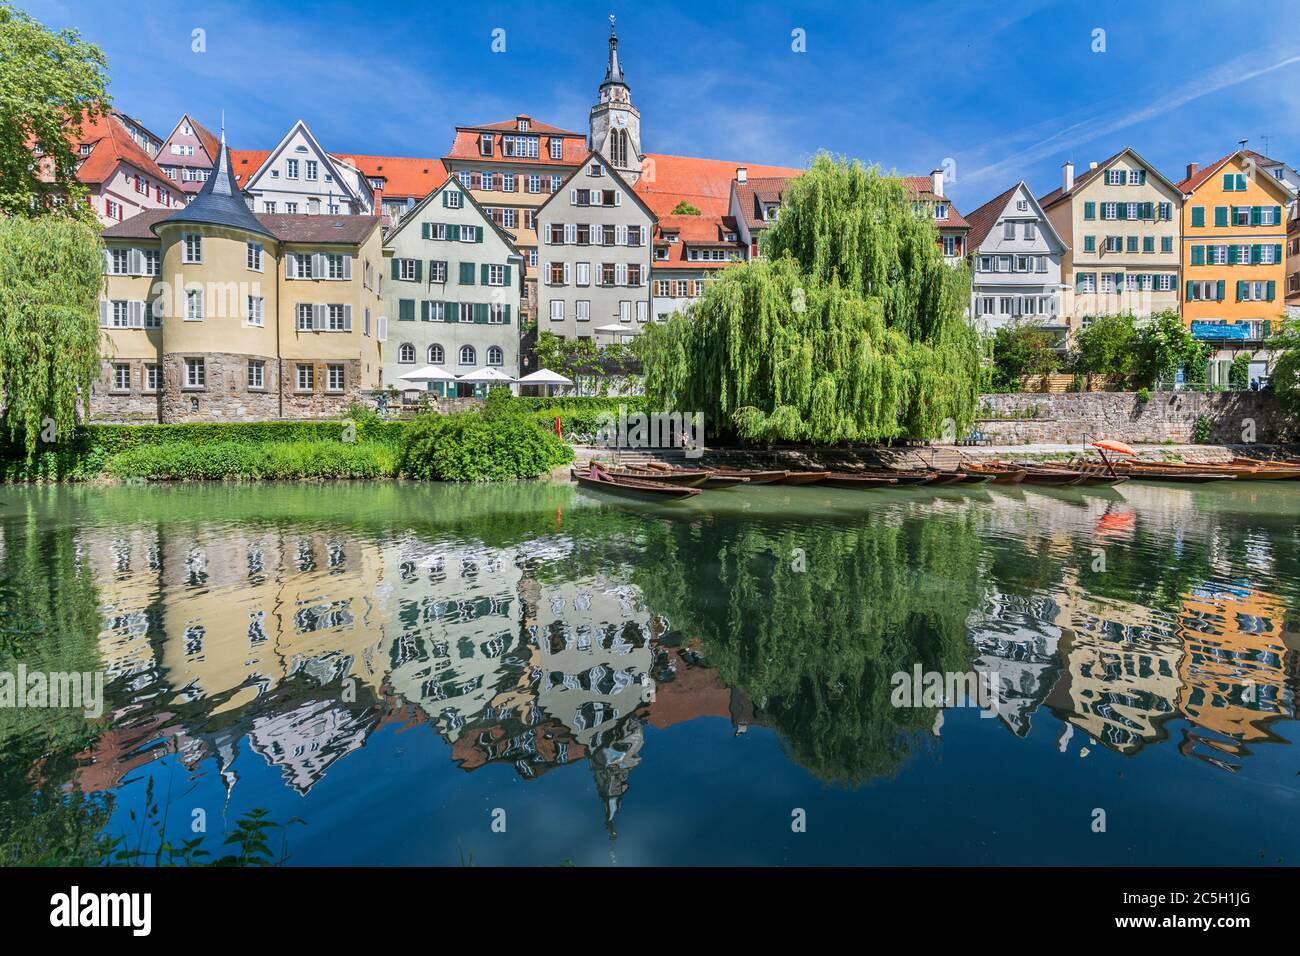 View of the historic old town of Tübingen, Germany with scenic reflection of the houses in the water Stock Photo